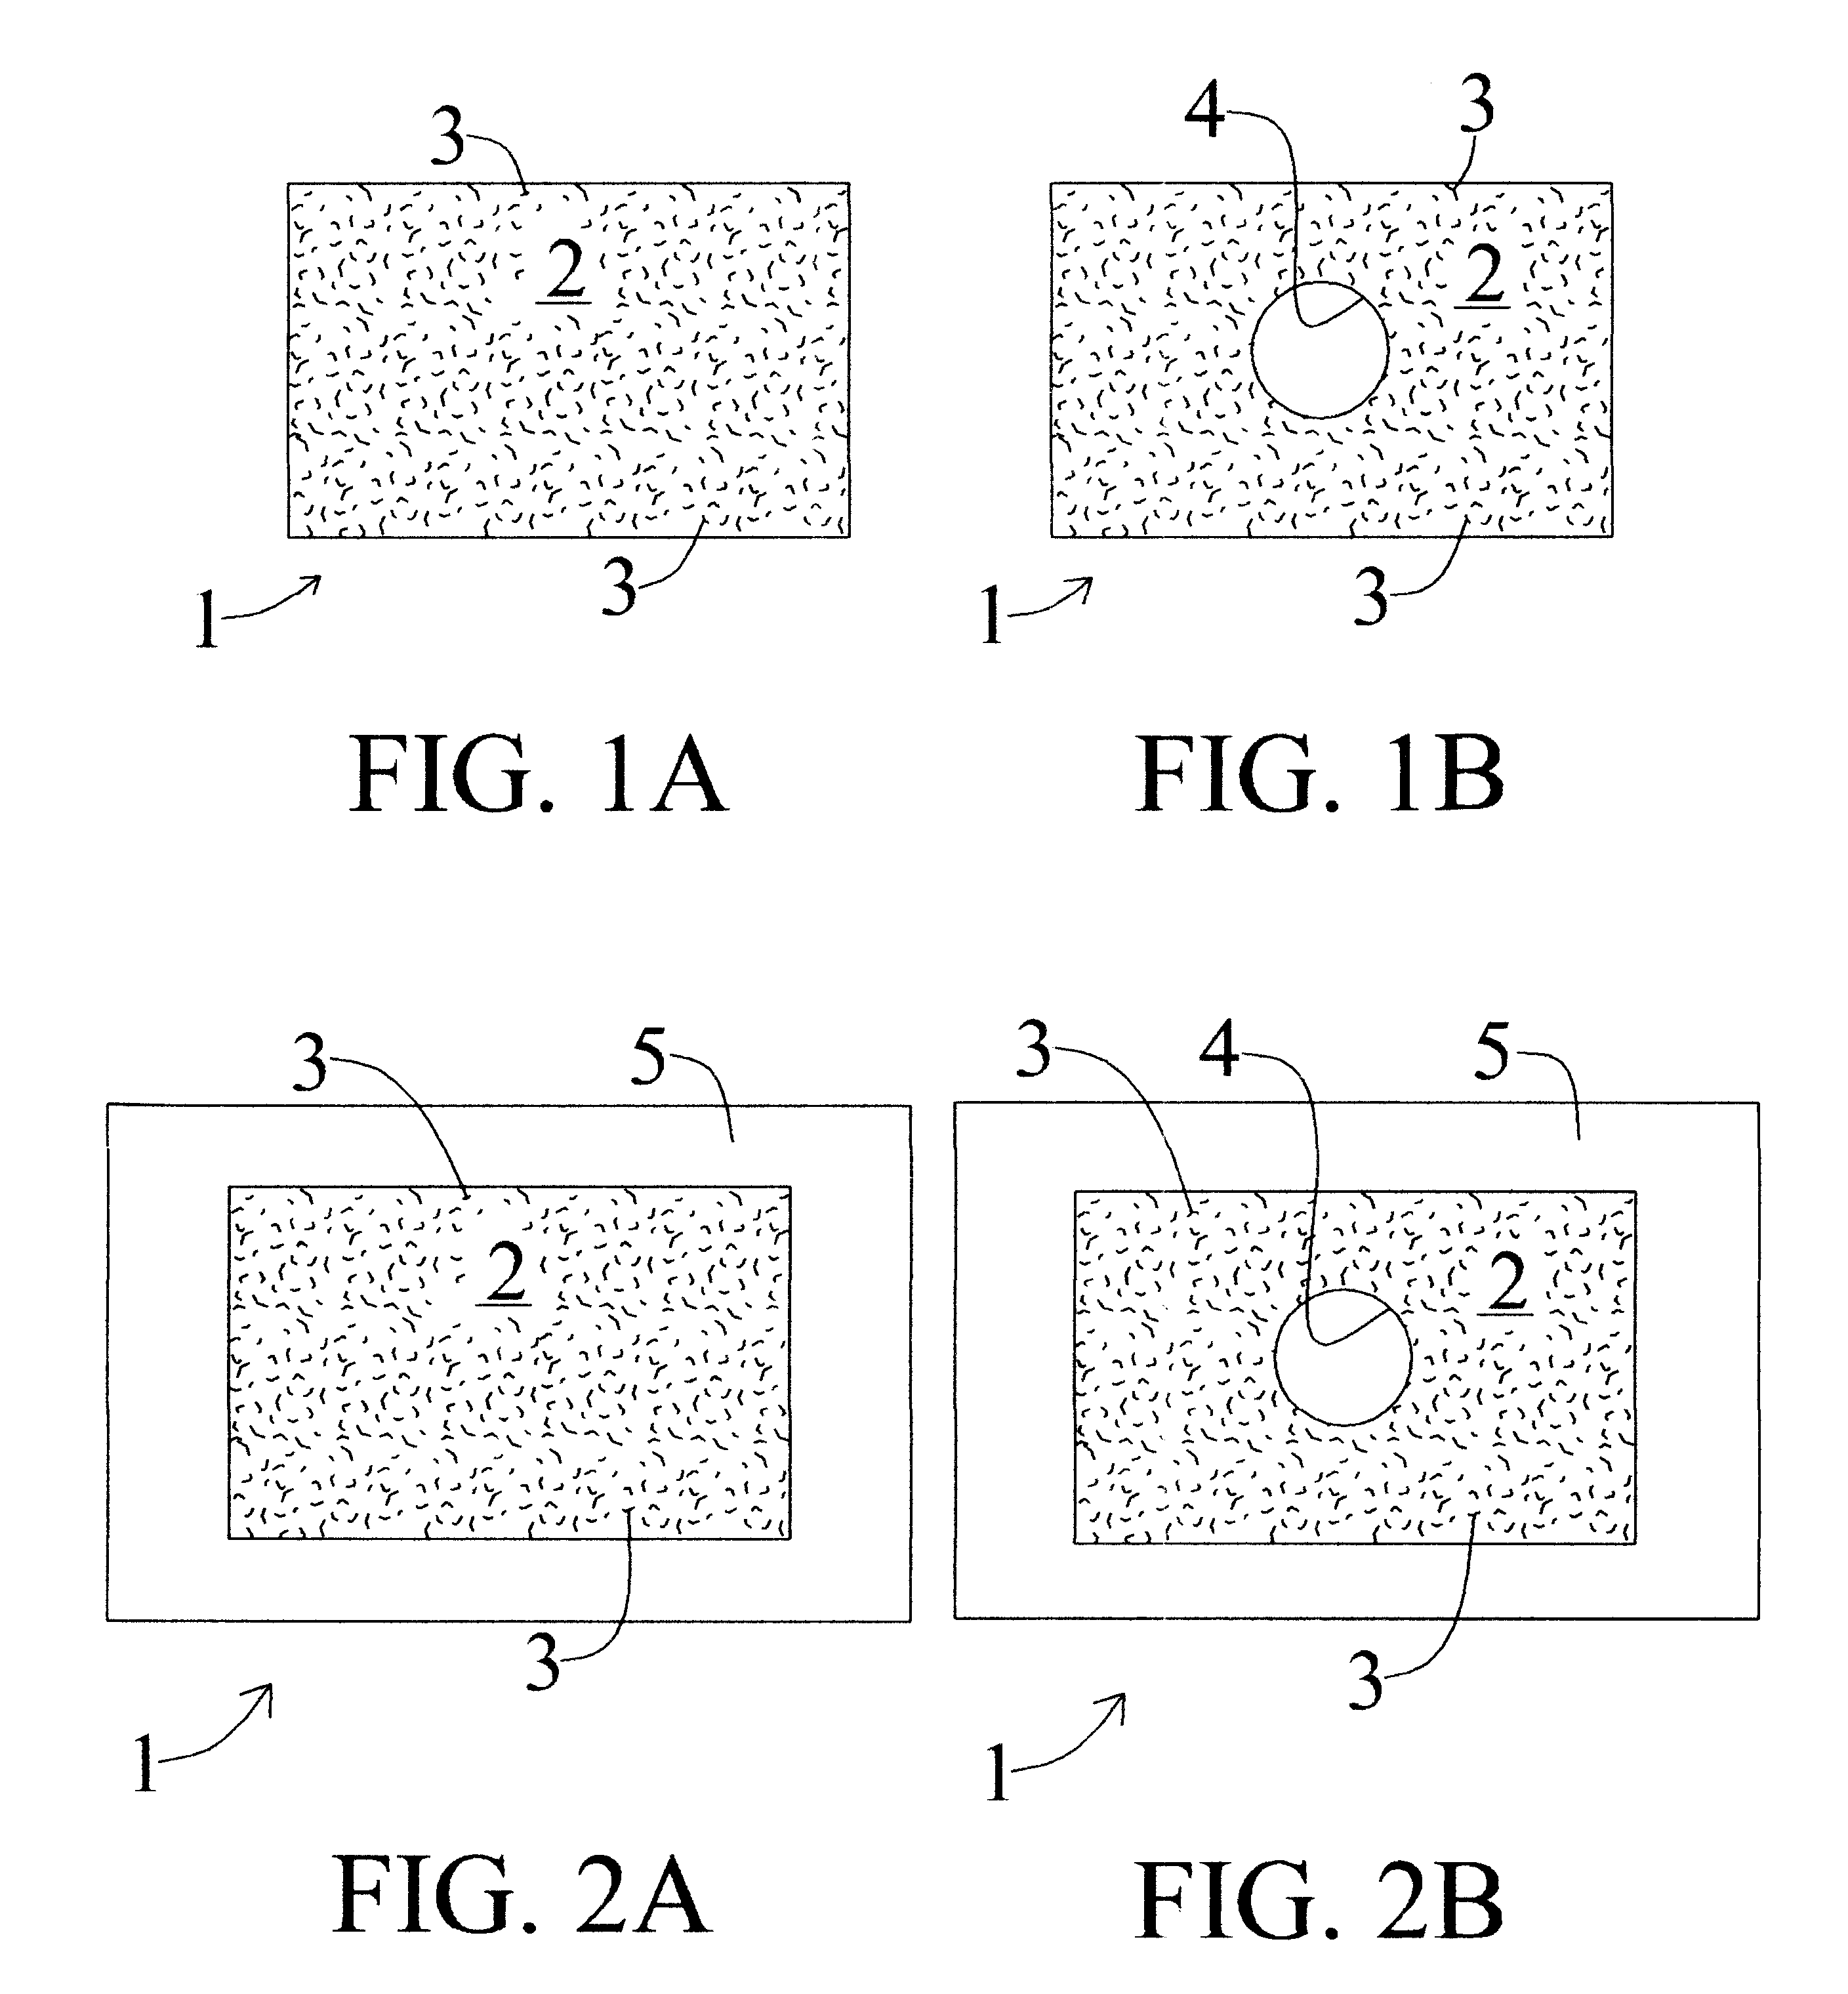 Apparatus and methods for preventing or treating failure of hemodialysis vascular access and other vascular grafts